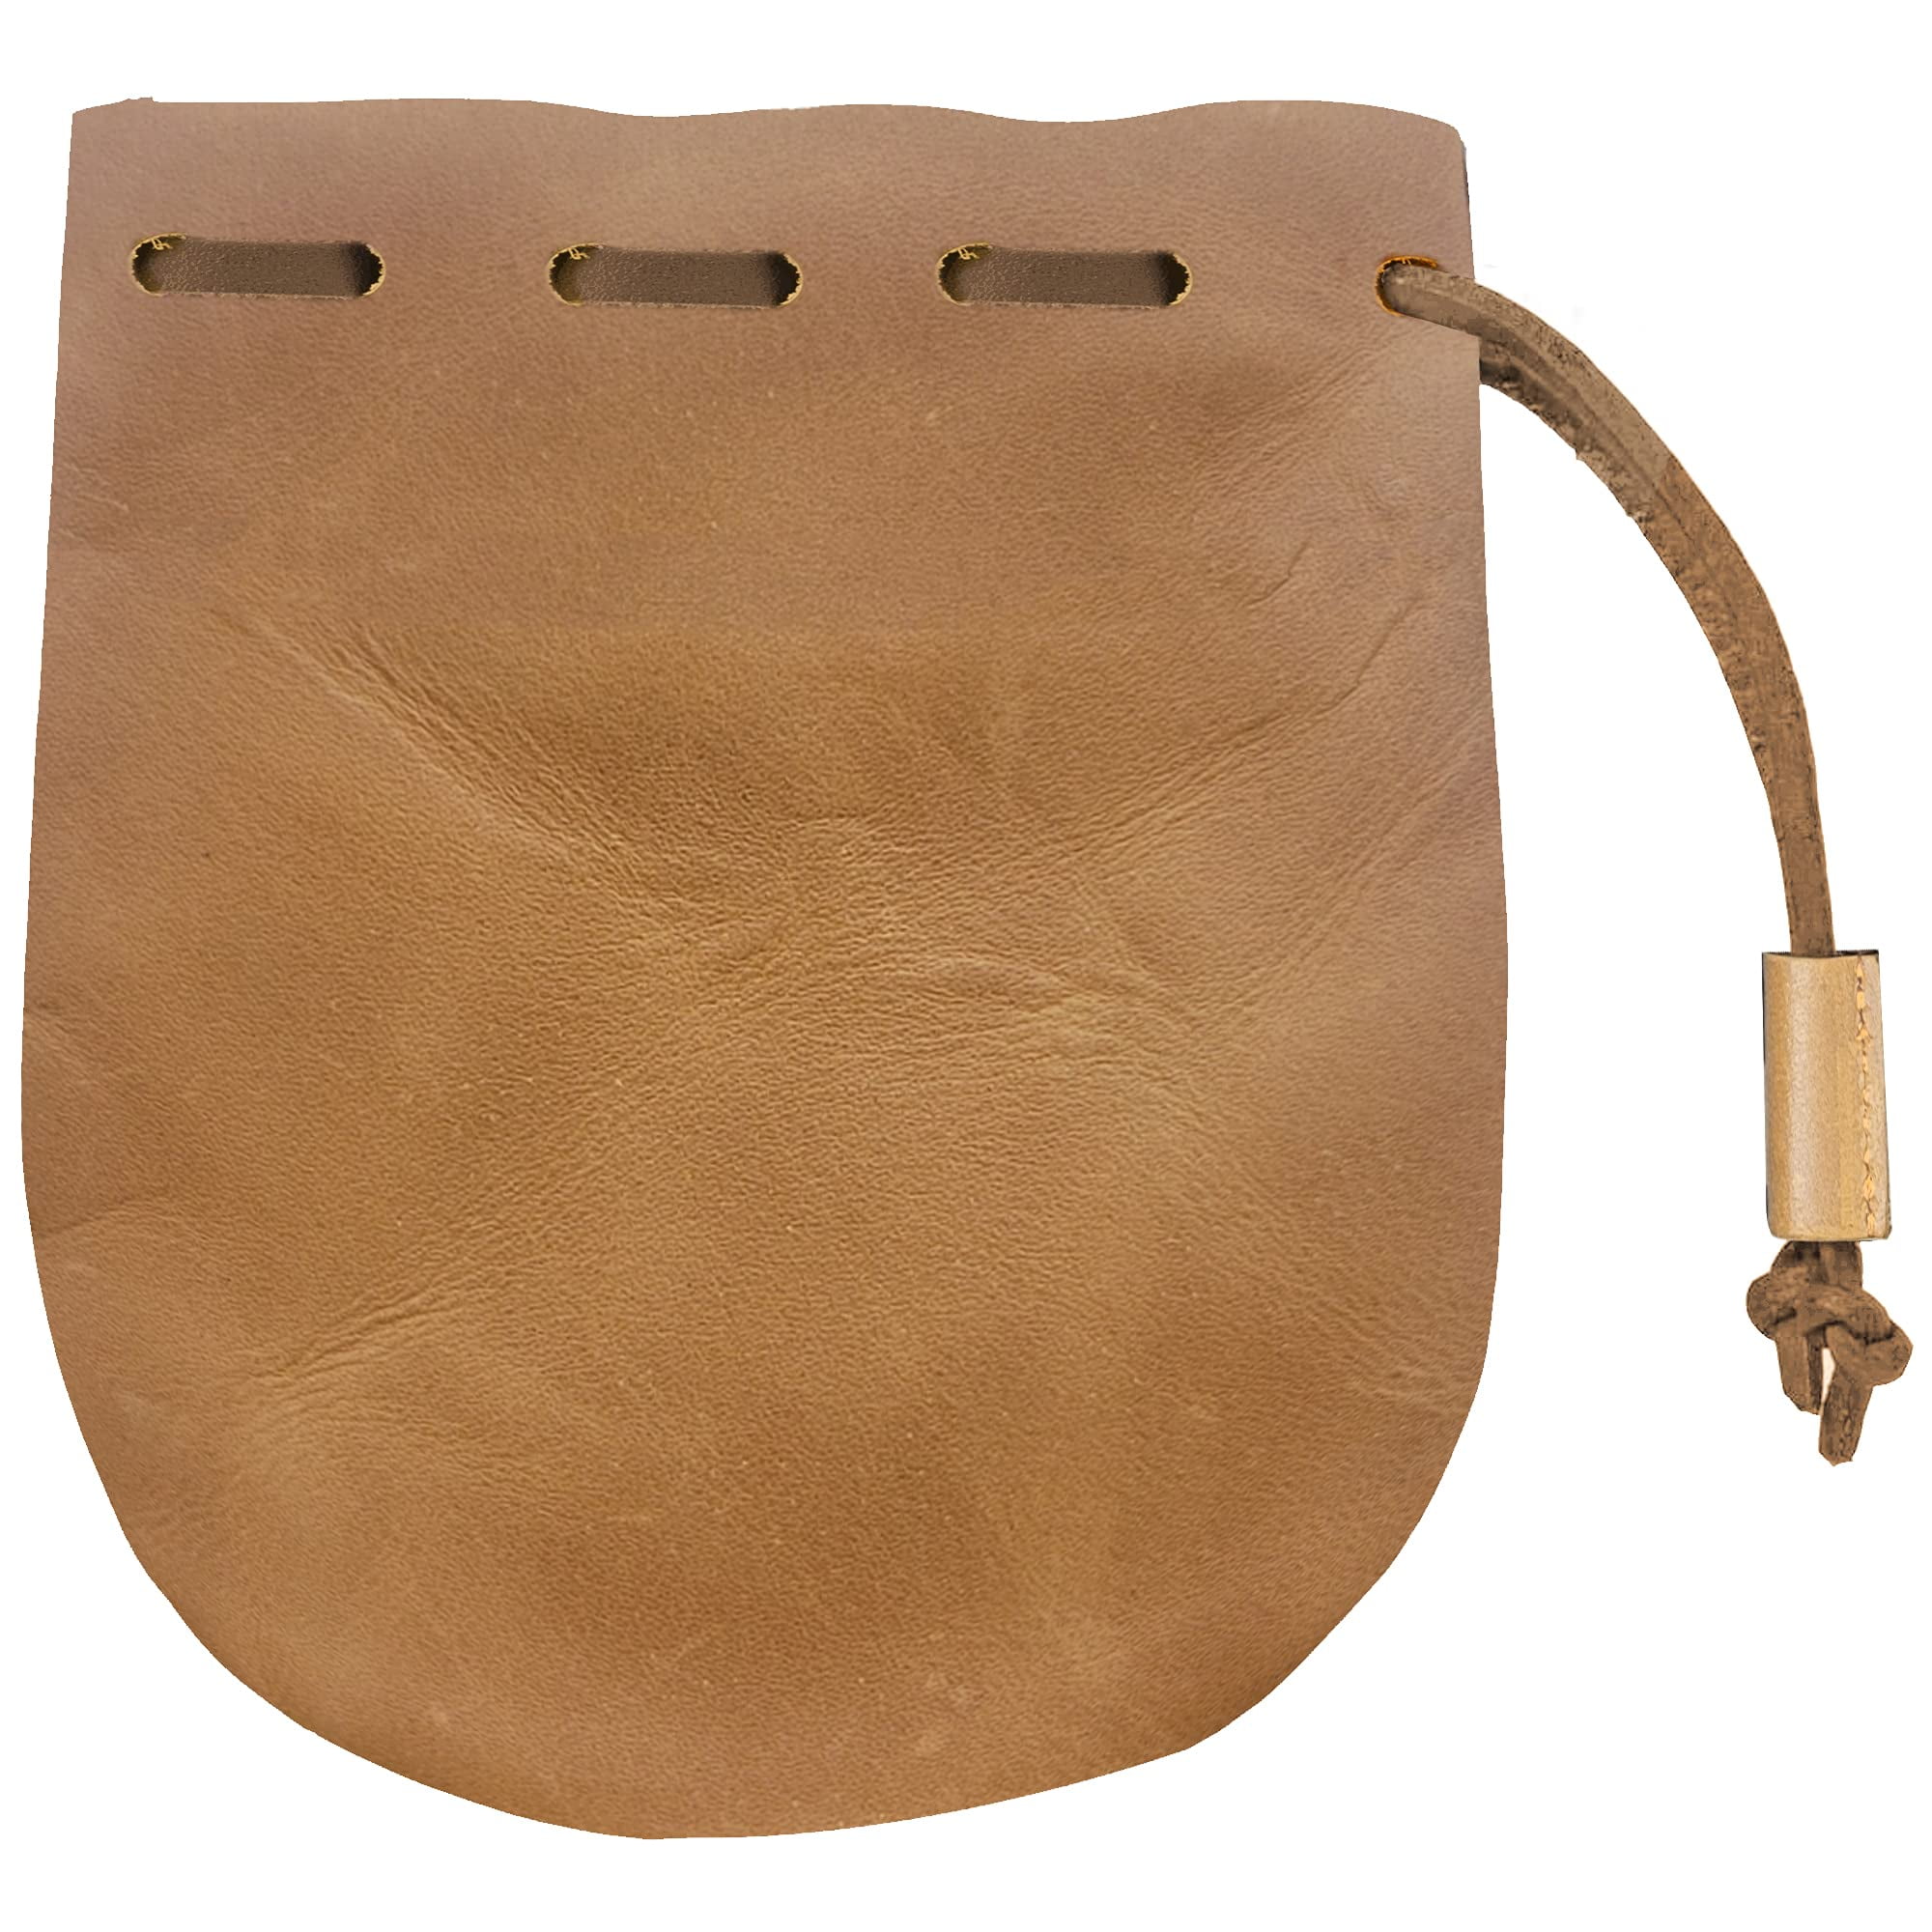 Leather Round Drawstring Pouch - Small Tech, Makeup, Jewelry Holder, MicroSuede Lining - Camel - Personalized Gifts, Leatherology